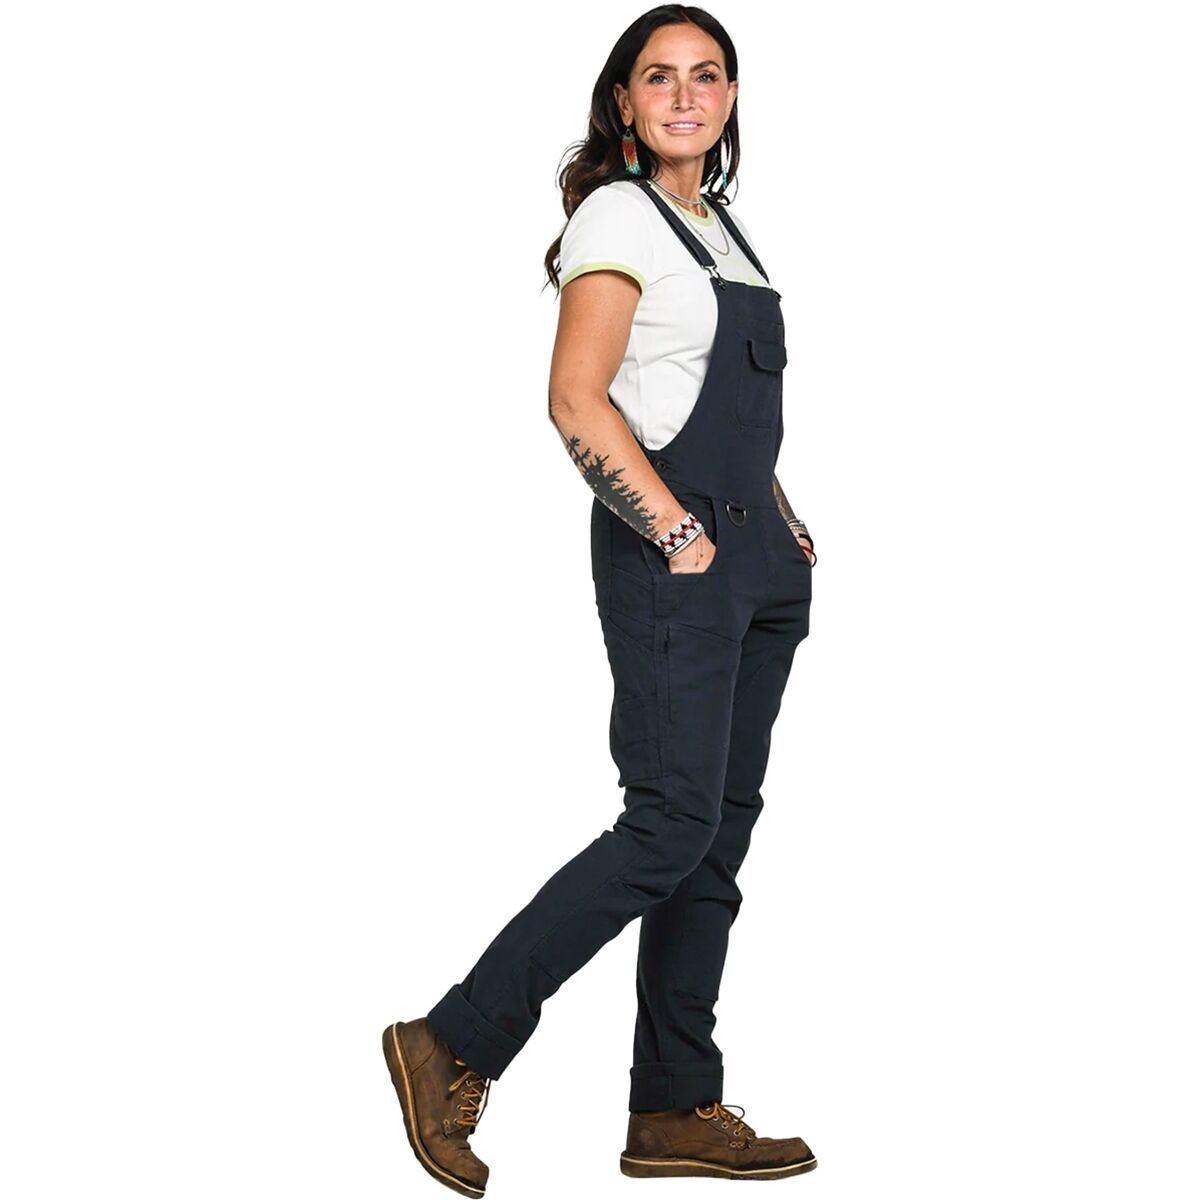 Dovetail Workwear Freshley Drop Seat Overalls - Women's